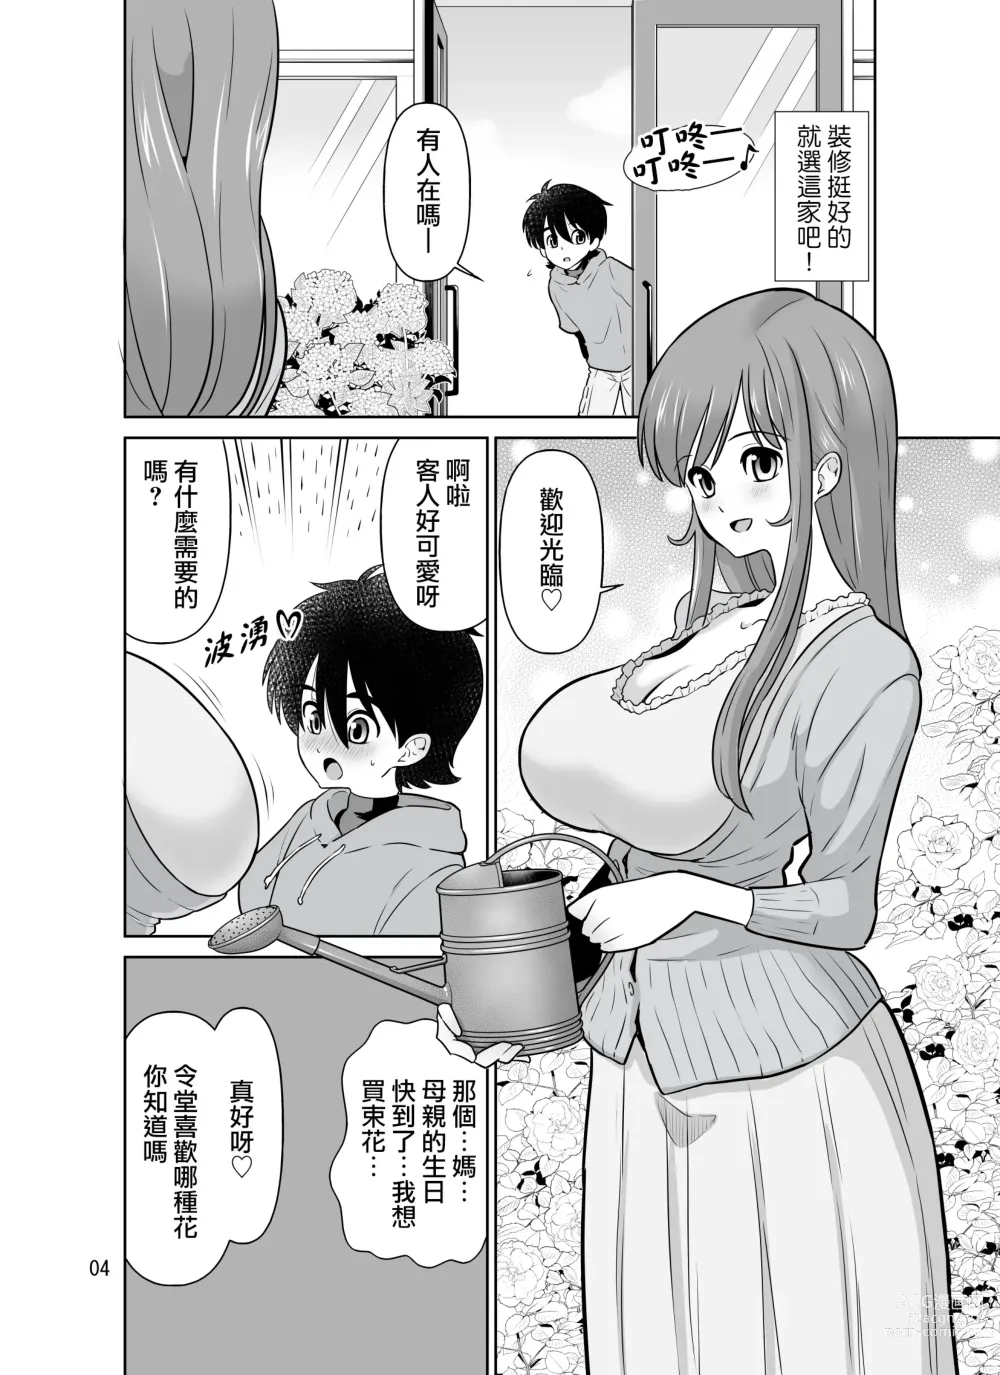 Page 4 of doujinshi 触手花店的大姐姐